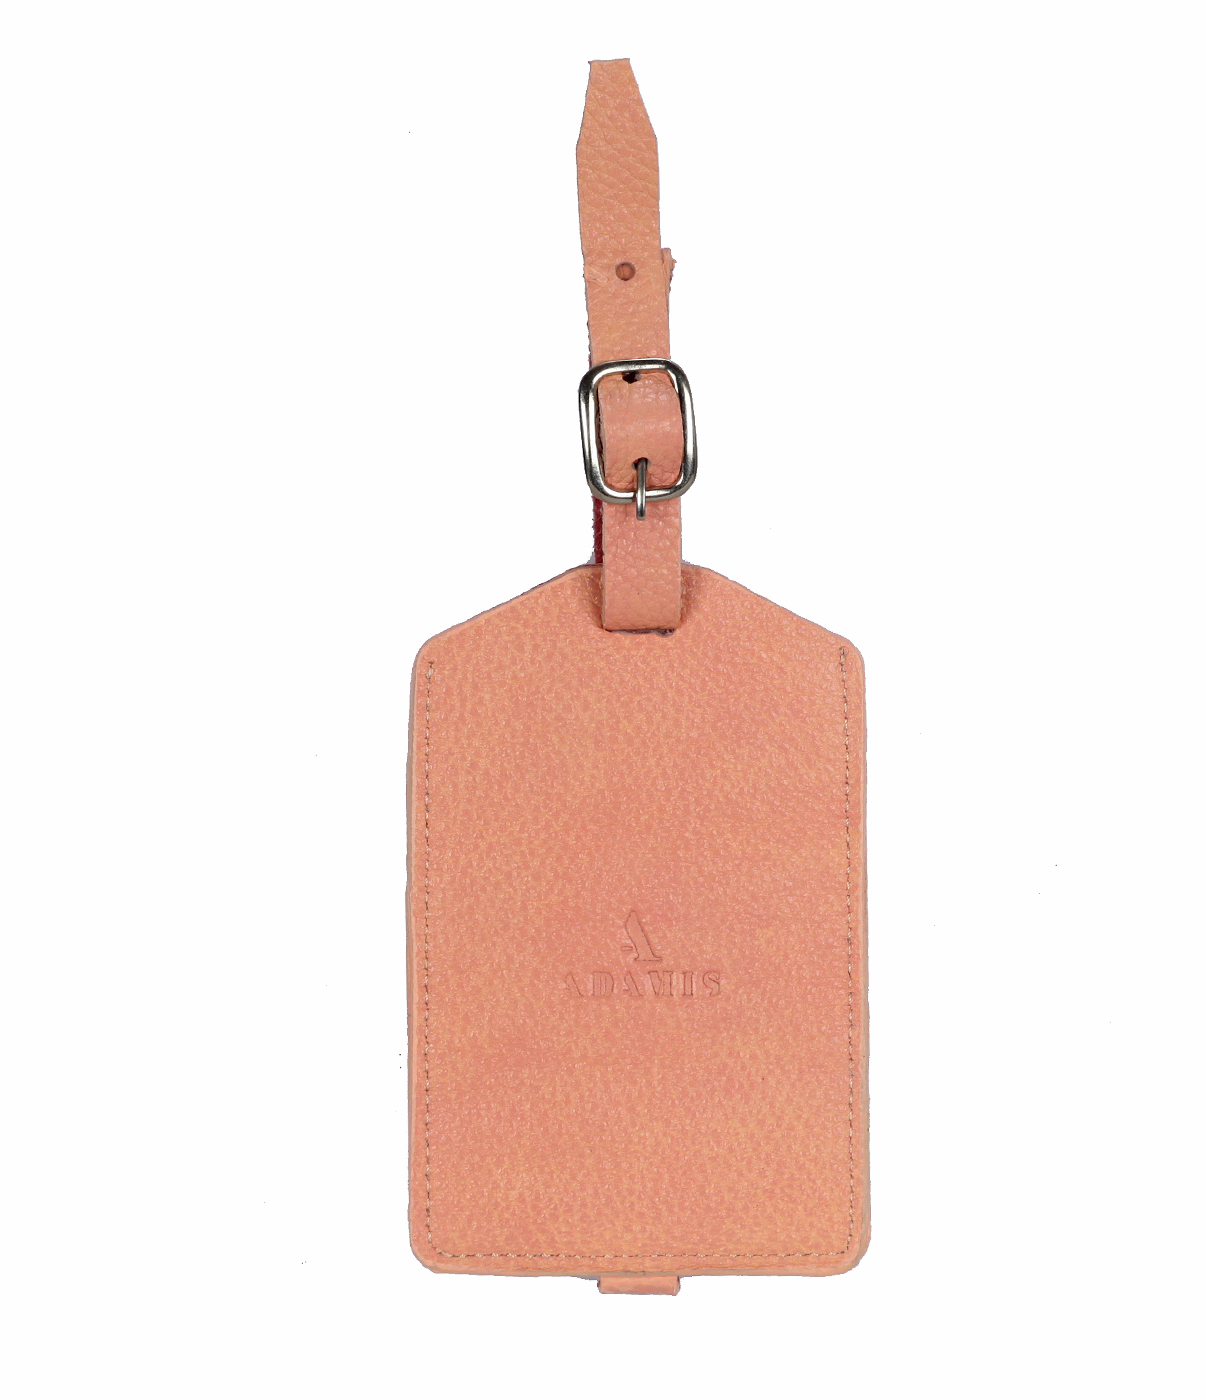 W283--Luggage, Recognising tag in Genuine Leather - Pink.